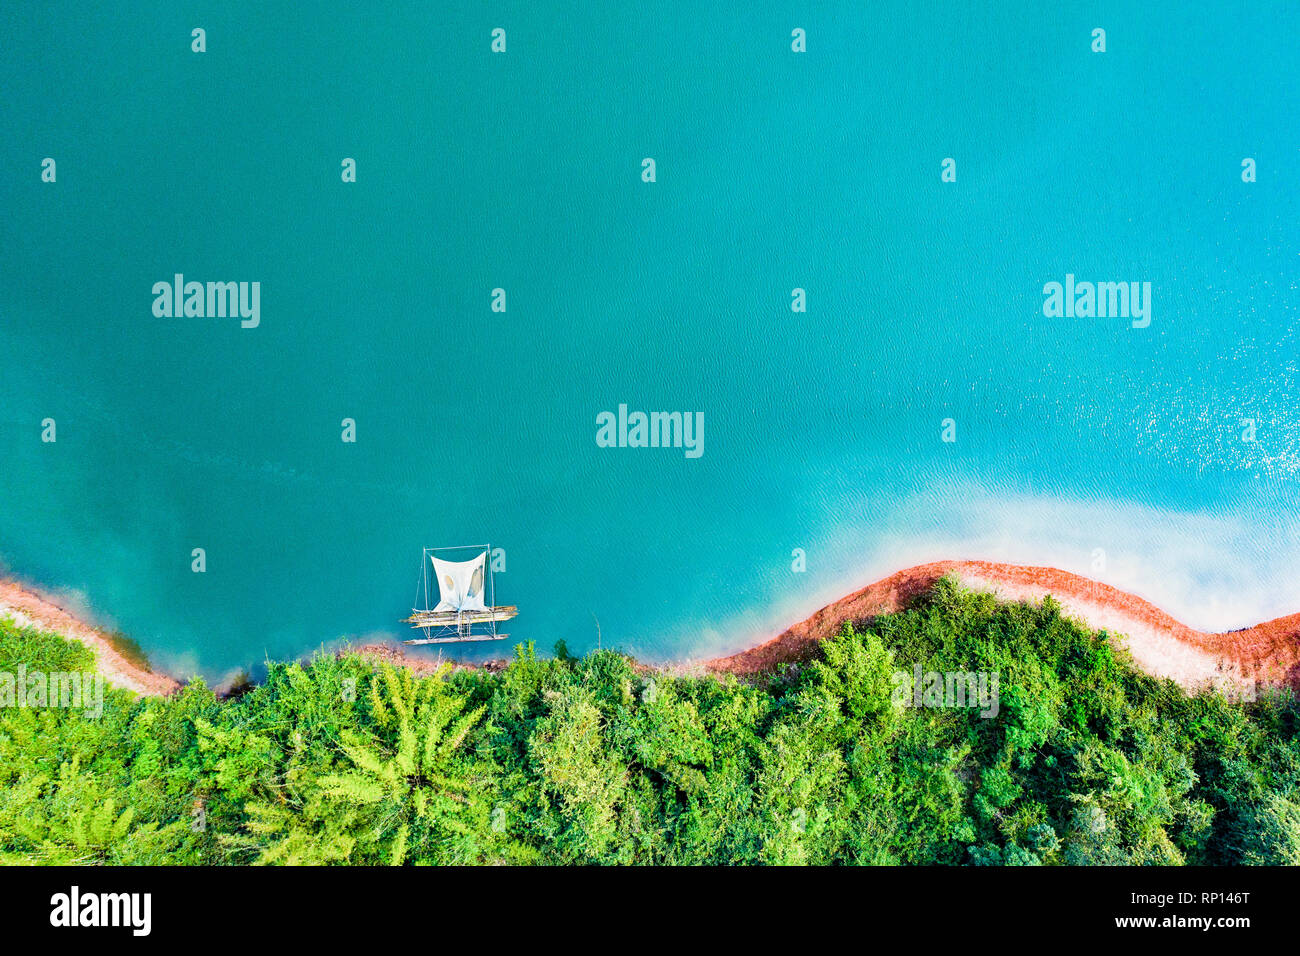 (View from above) Stunning aerial view of a a green coast of a tropical island with a traditional fishing boat in Nam Ngum Reservoir. Stock Photo